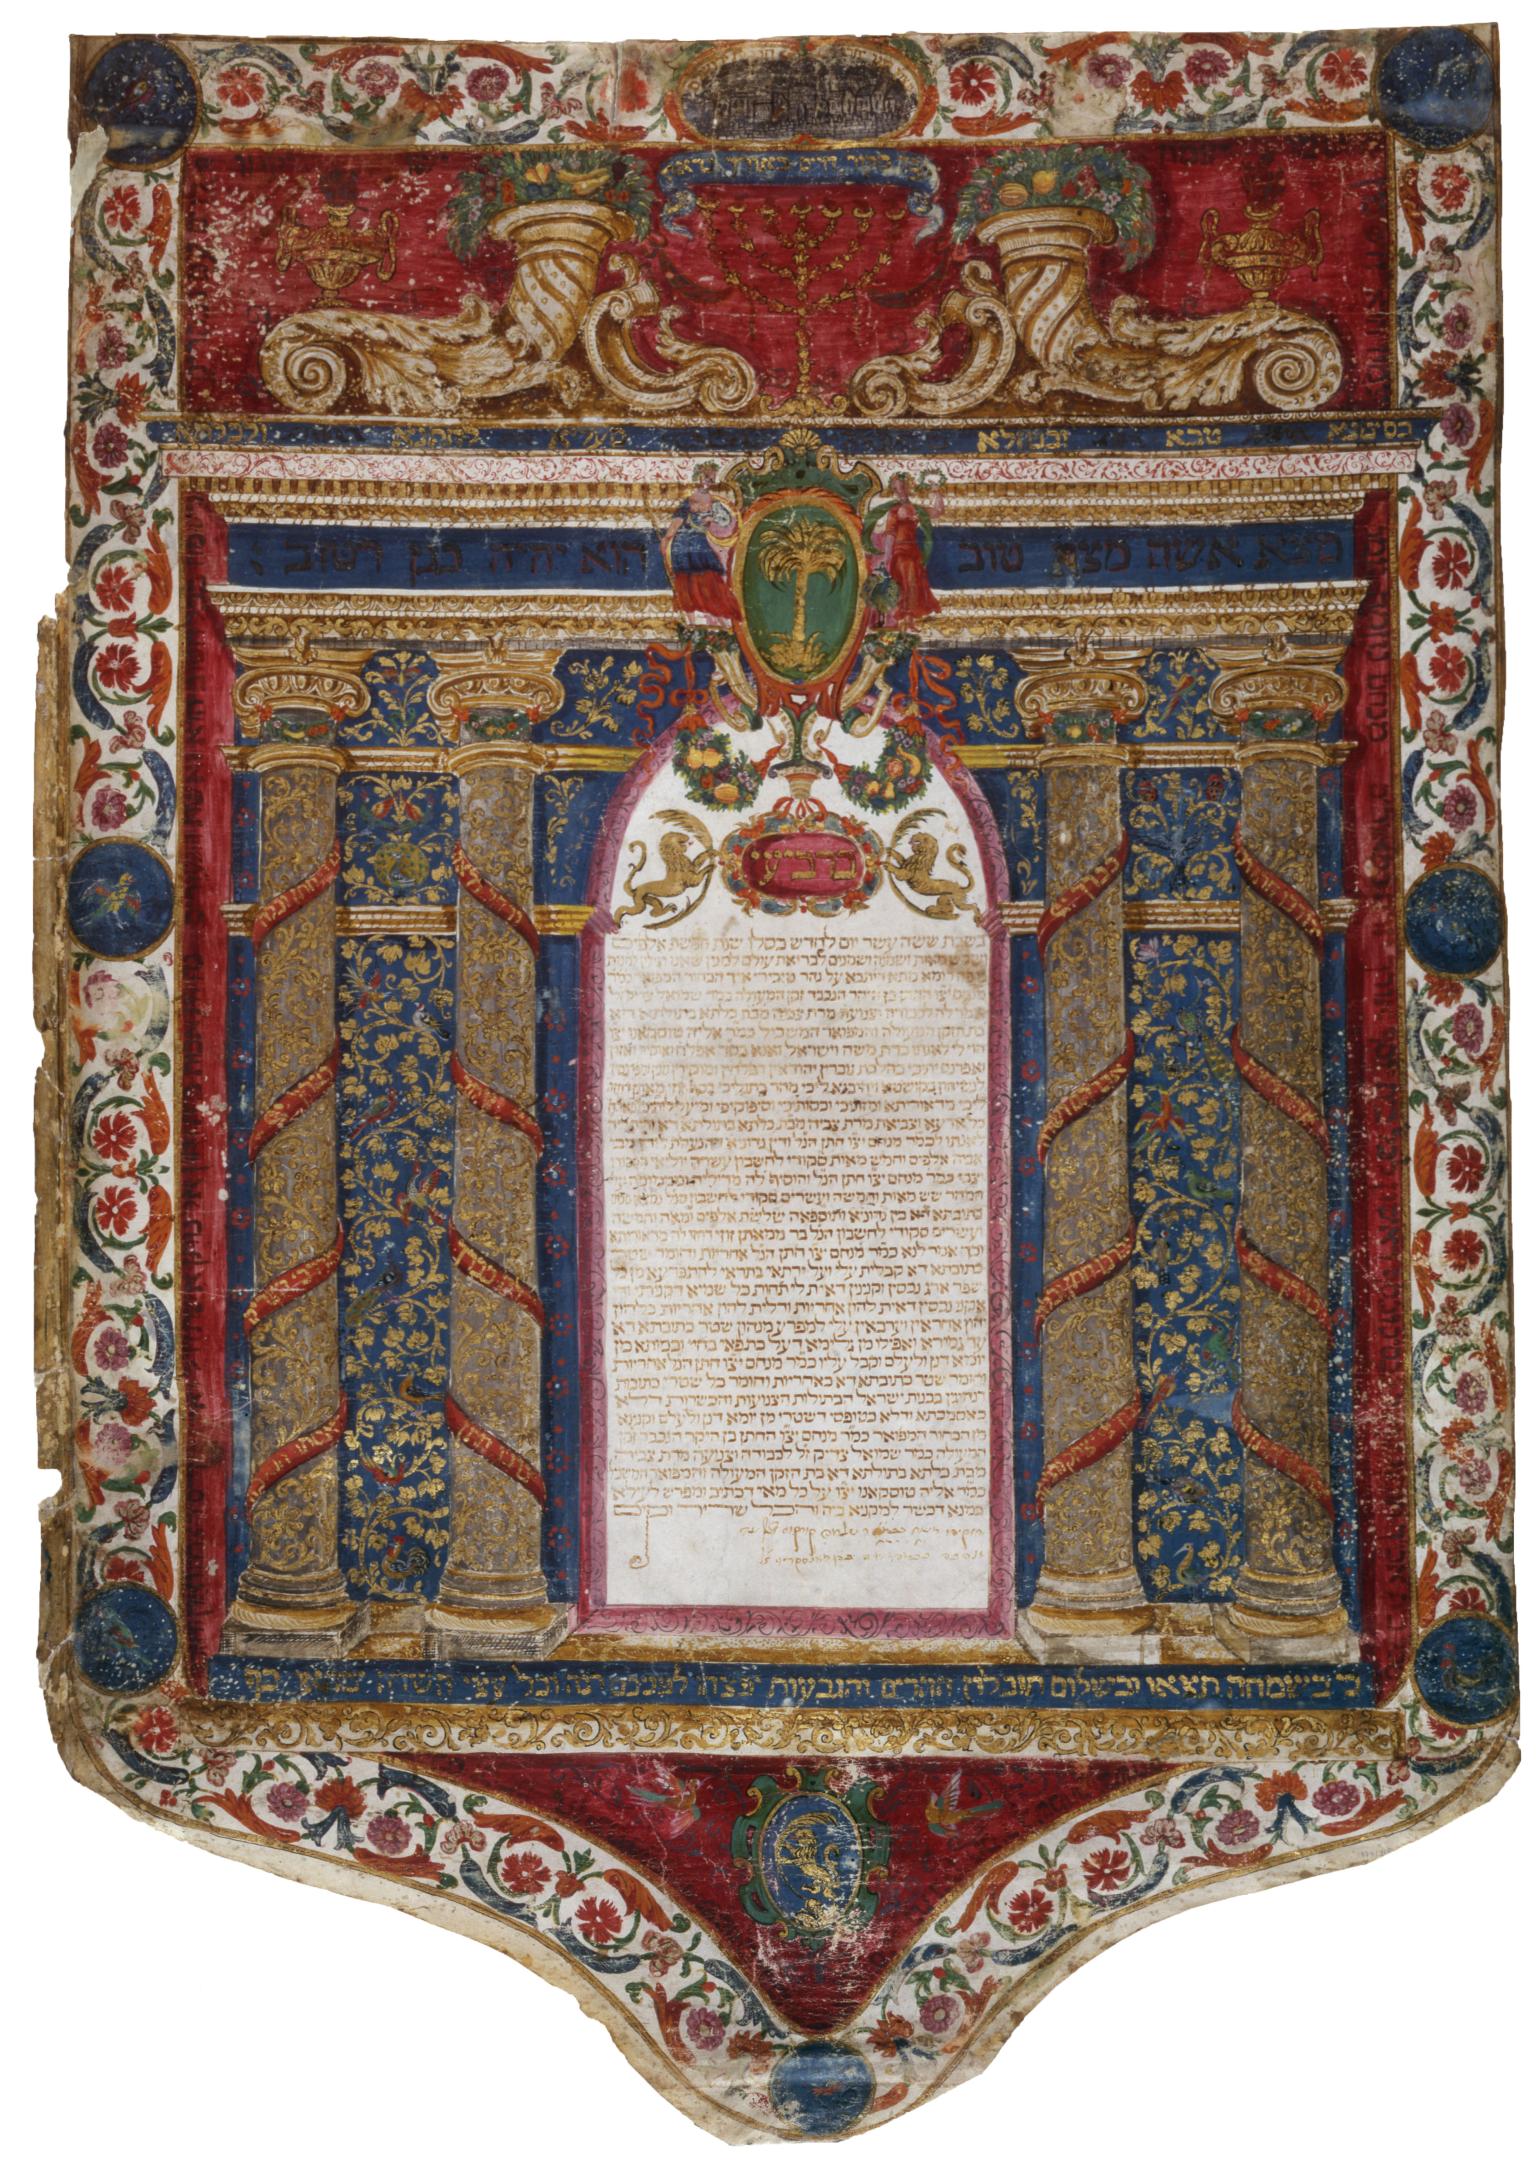 Page of Aramaic text framed by drawing of four columns and gateway with two cornucopias on top, decorated with flowers and vines throughout. 